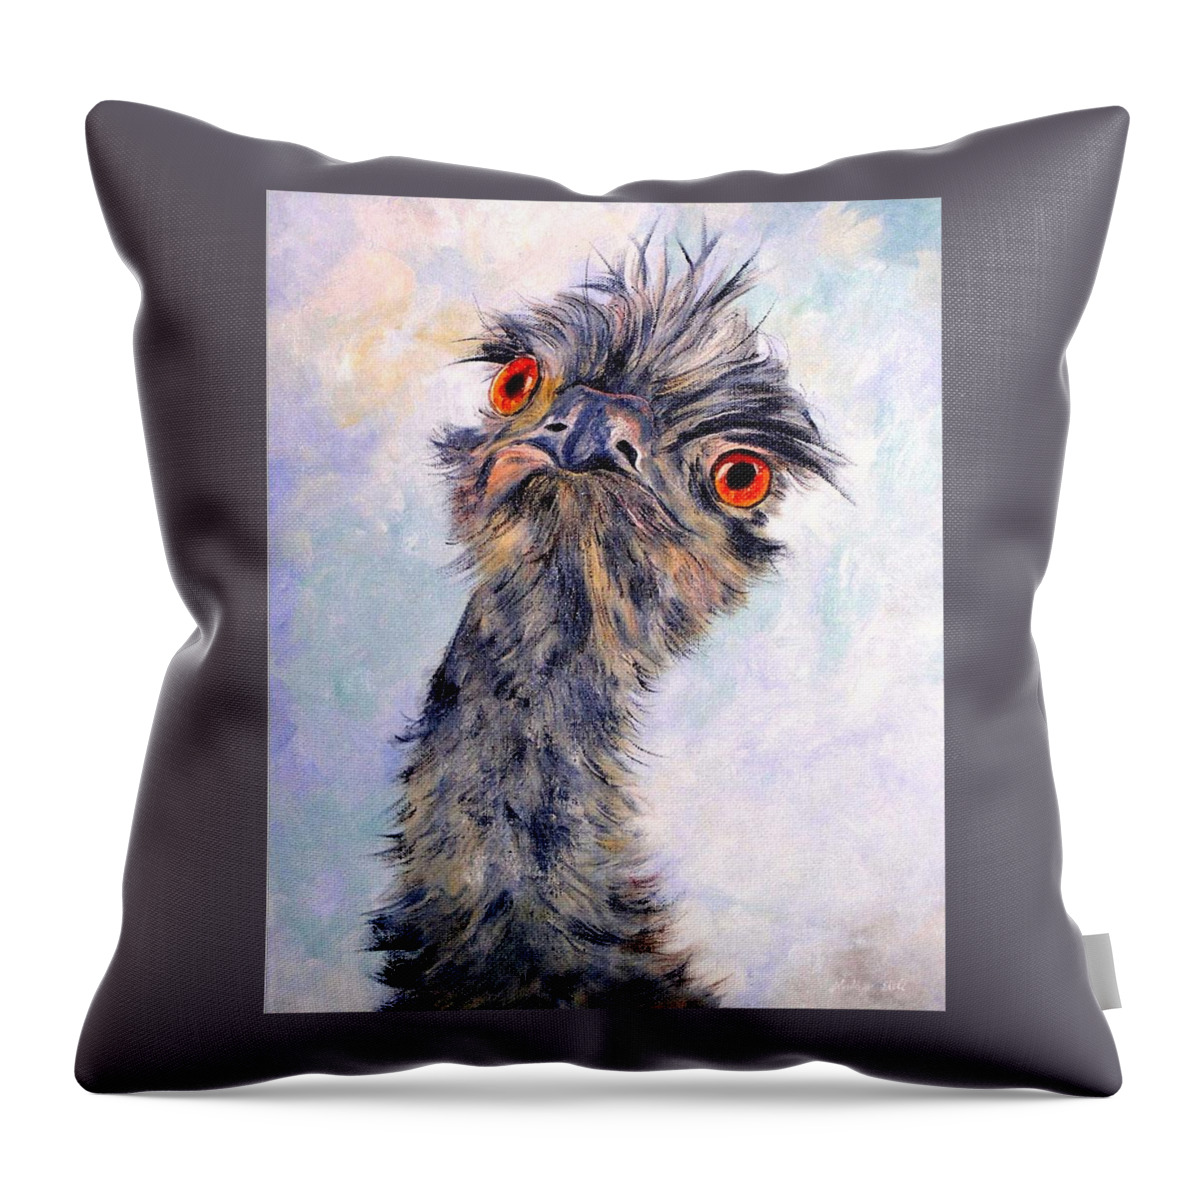 Emu Throw Pillow featuring the painting Emu Twister by Ryn Shell